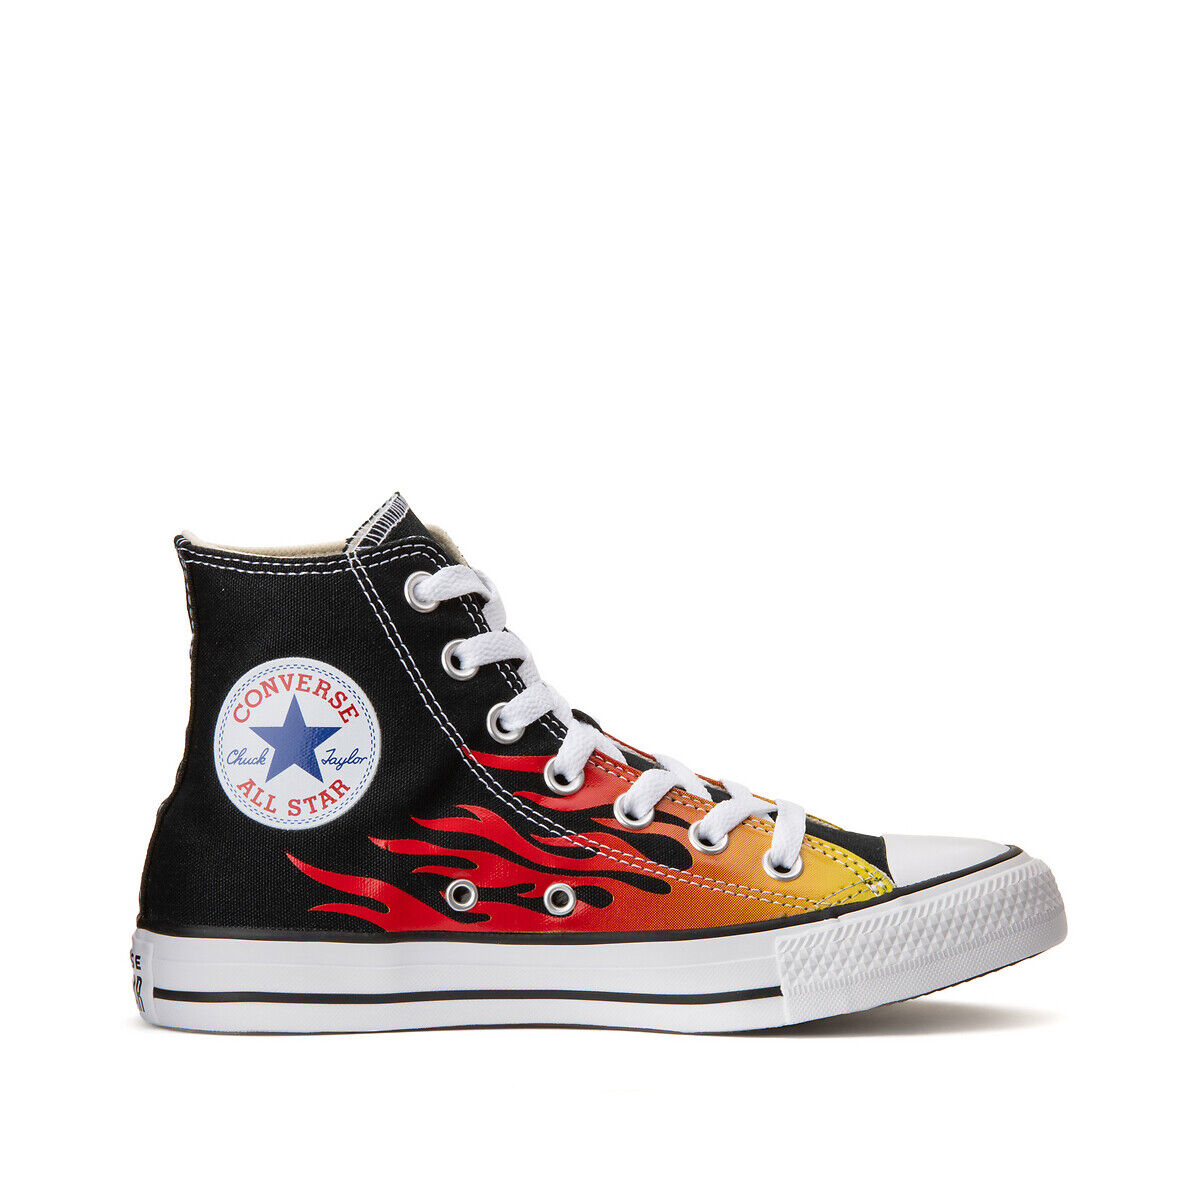 CONVERSE Sneakers Chuck Taylor All Star Archive Prints SCHWARZ